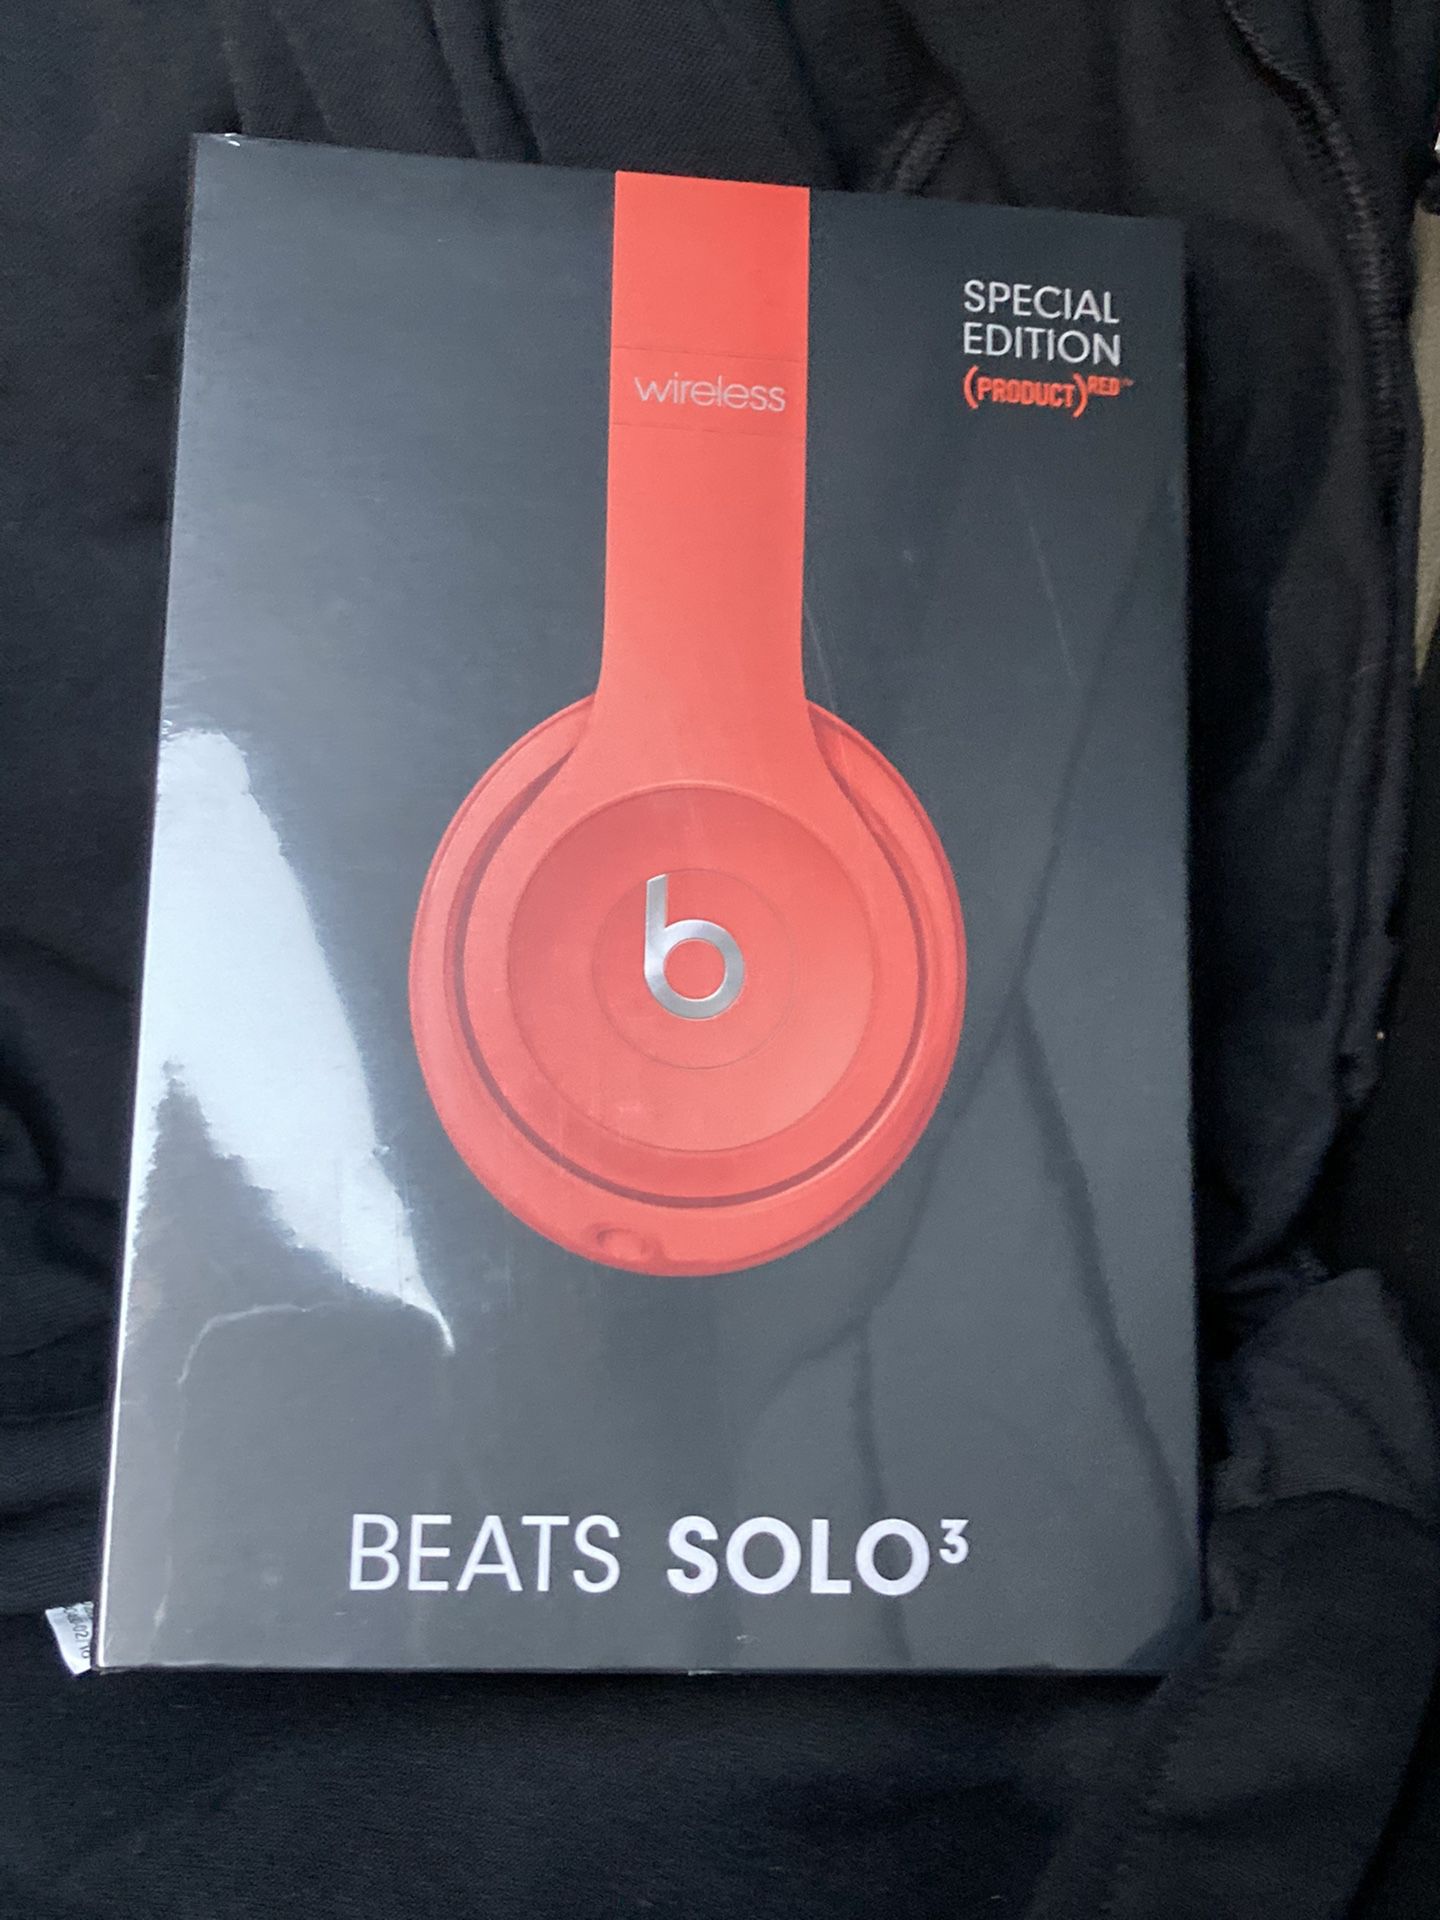 Beats solo3 special edition red